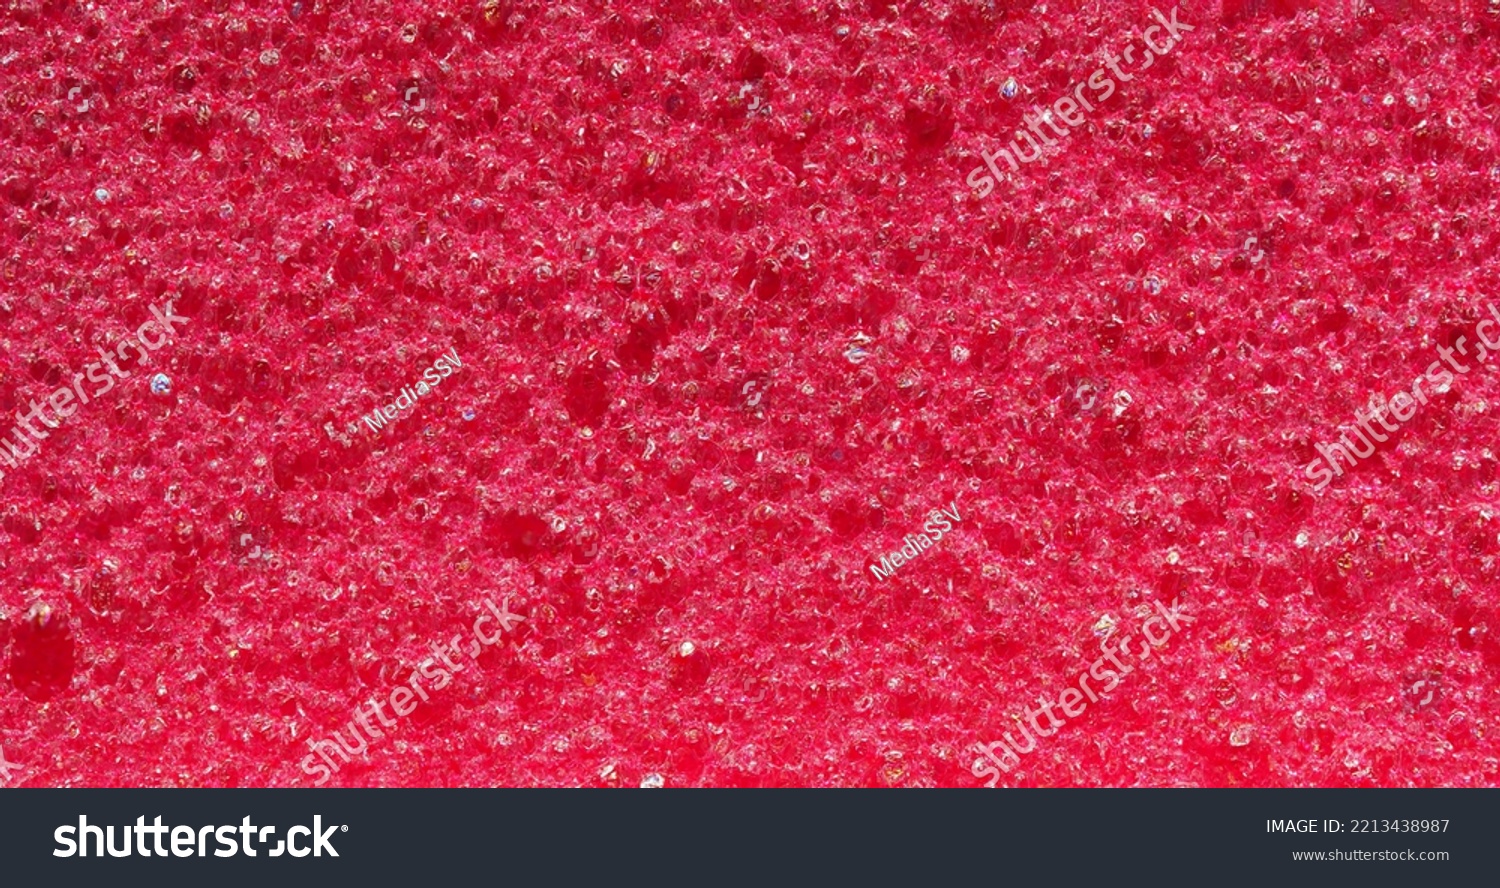 close-up, background, texture, large long horizontal banner. heterogeneous surface fine pore structure bright saturated red pumice stone for finger care. full depth of field. high resolution photo #2213438987